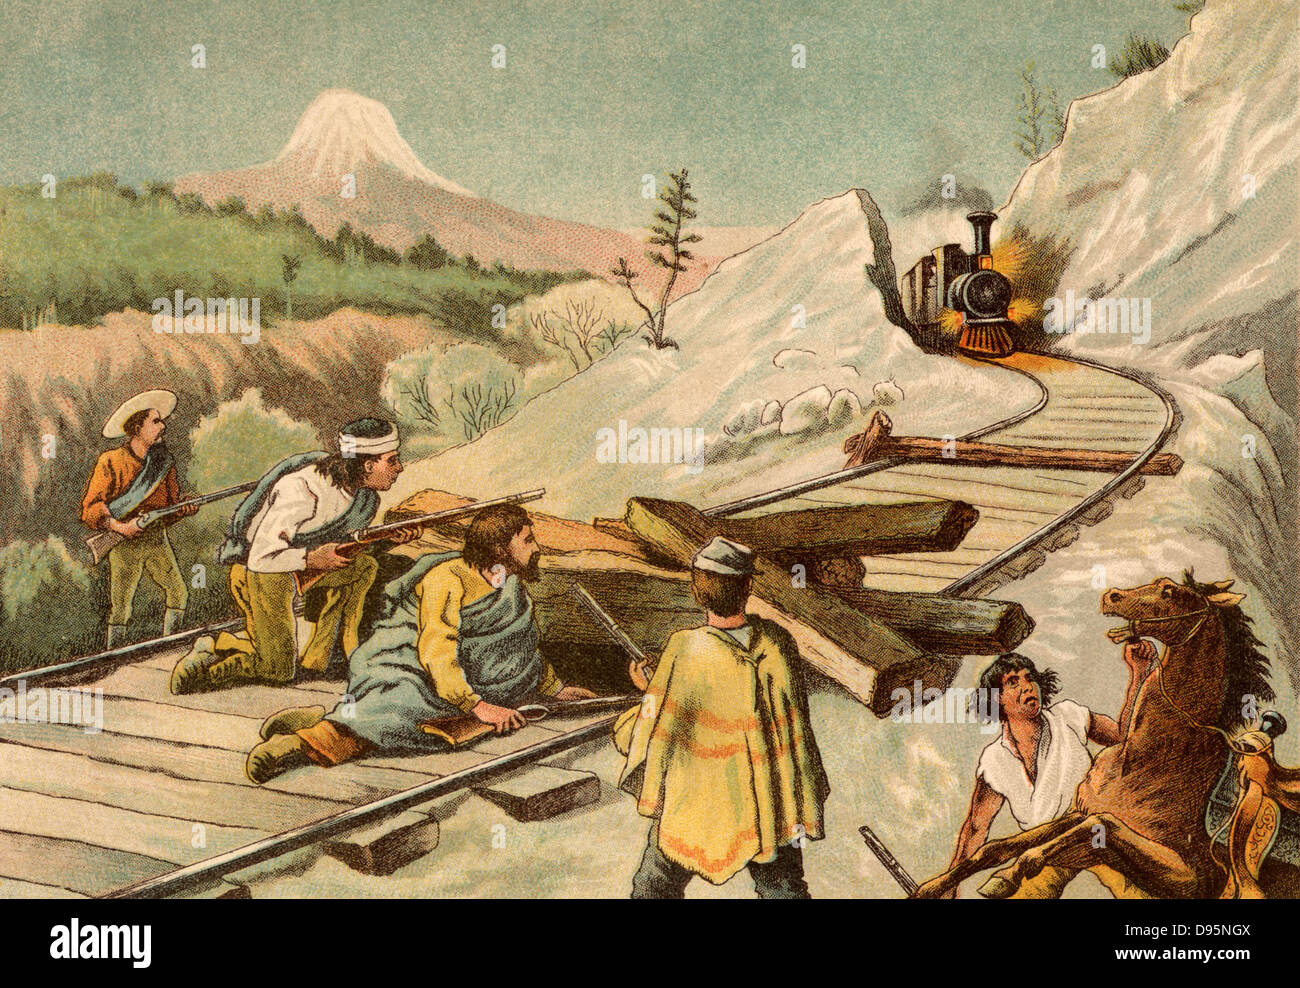 Bandits ambushing a train in the New Hampshire-Maine area of the United States.  Chromolithograph from 'Young England' (London, 1888). Stock Photo